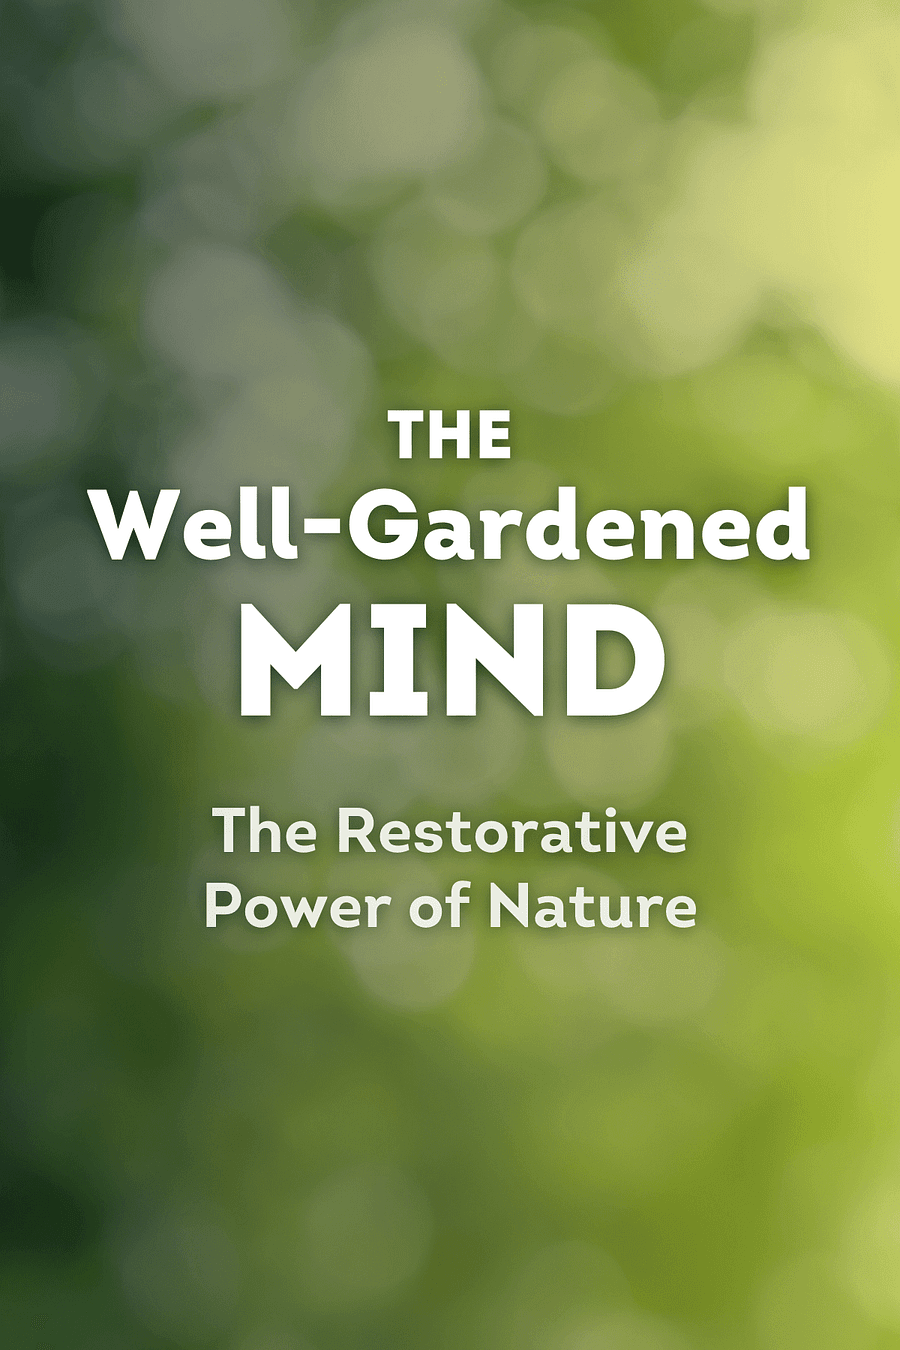 The Well-Gardened Mind by Sue Stuart-Smith - Book Summary